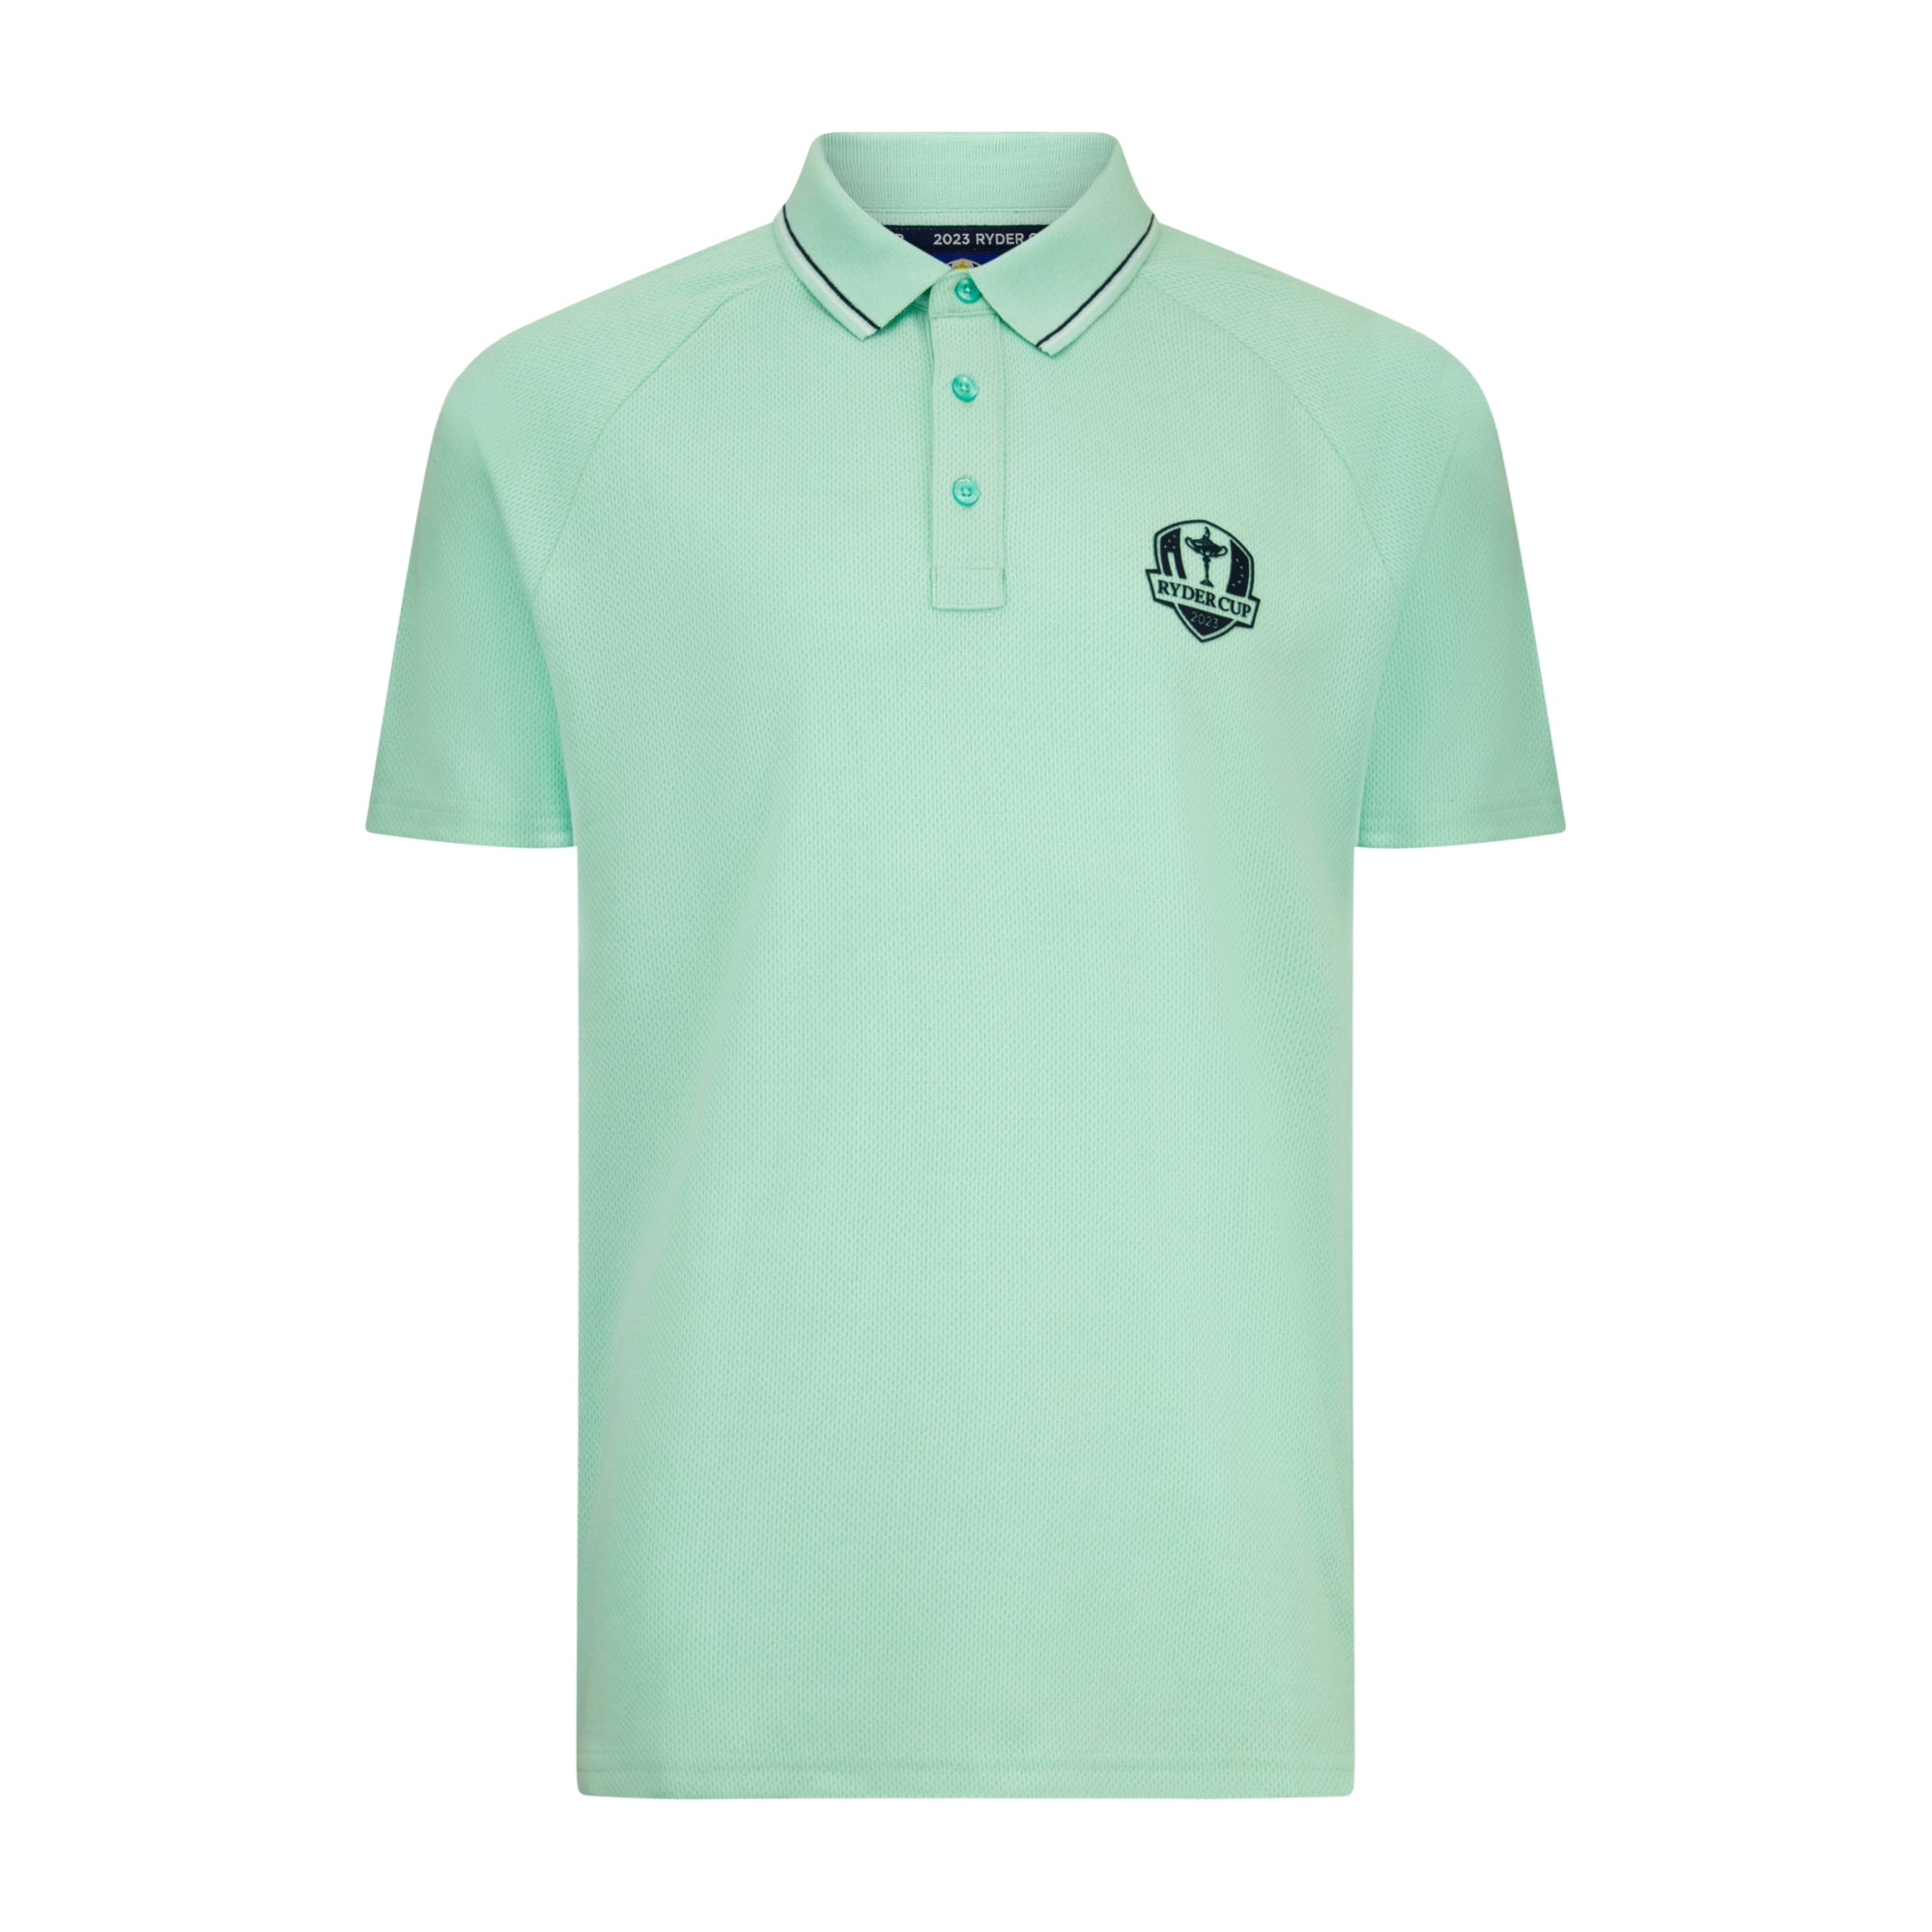 2023 Ryder Cup Men's Mint Green Polo Shirt - Front